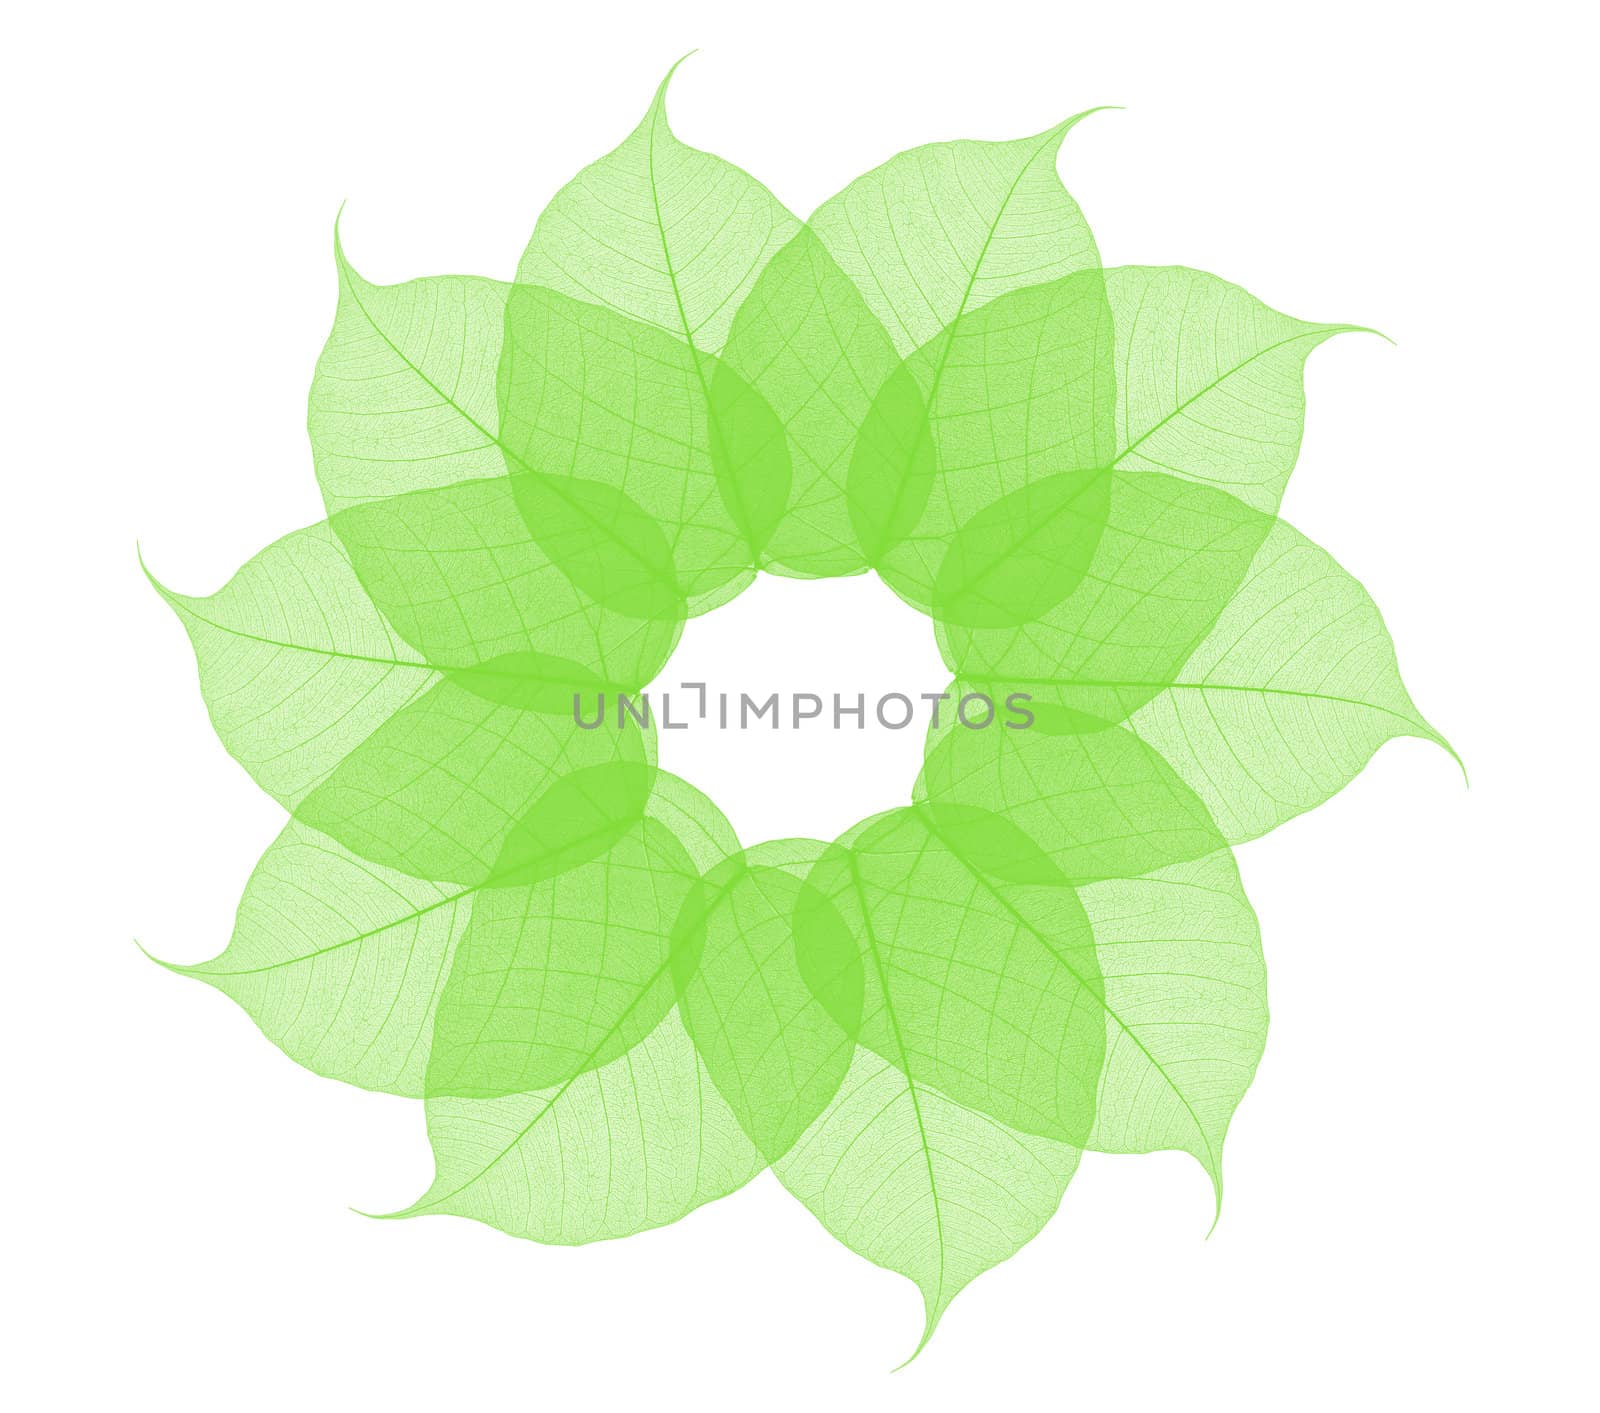 Skeleton Leaves Flower Composition on white background 
 by rufous